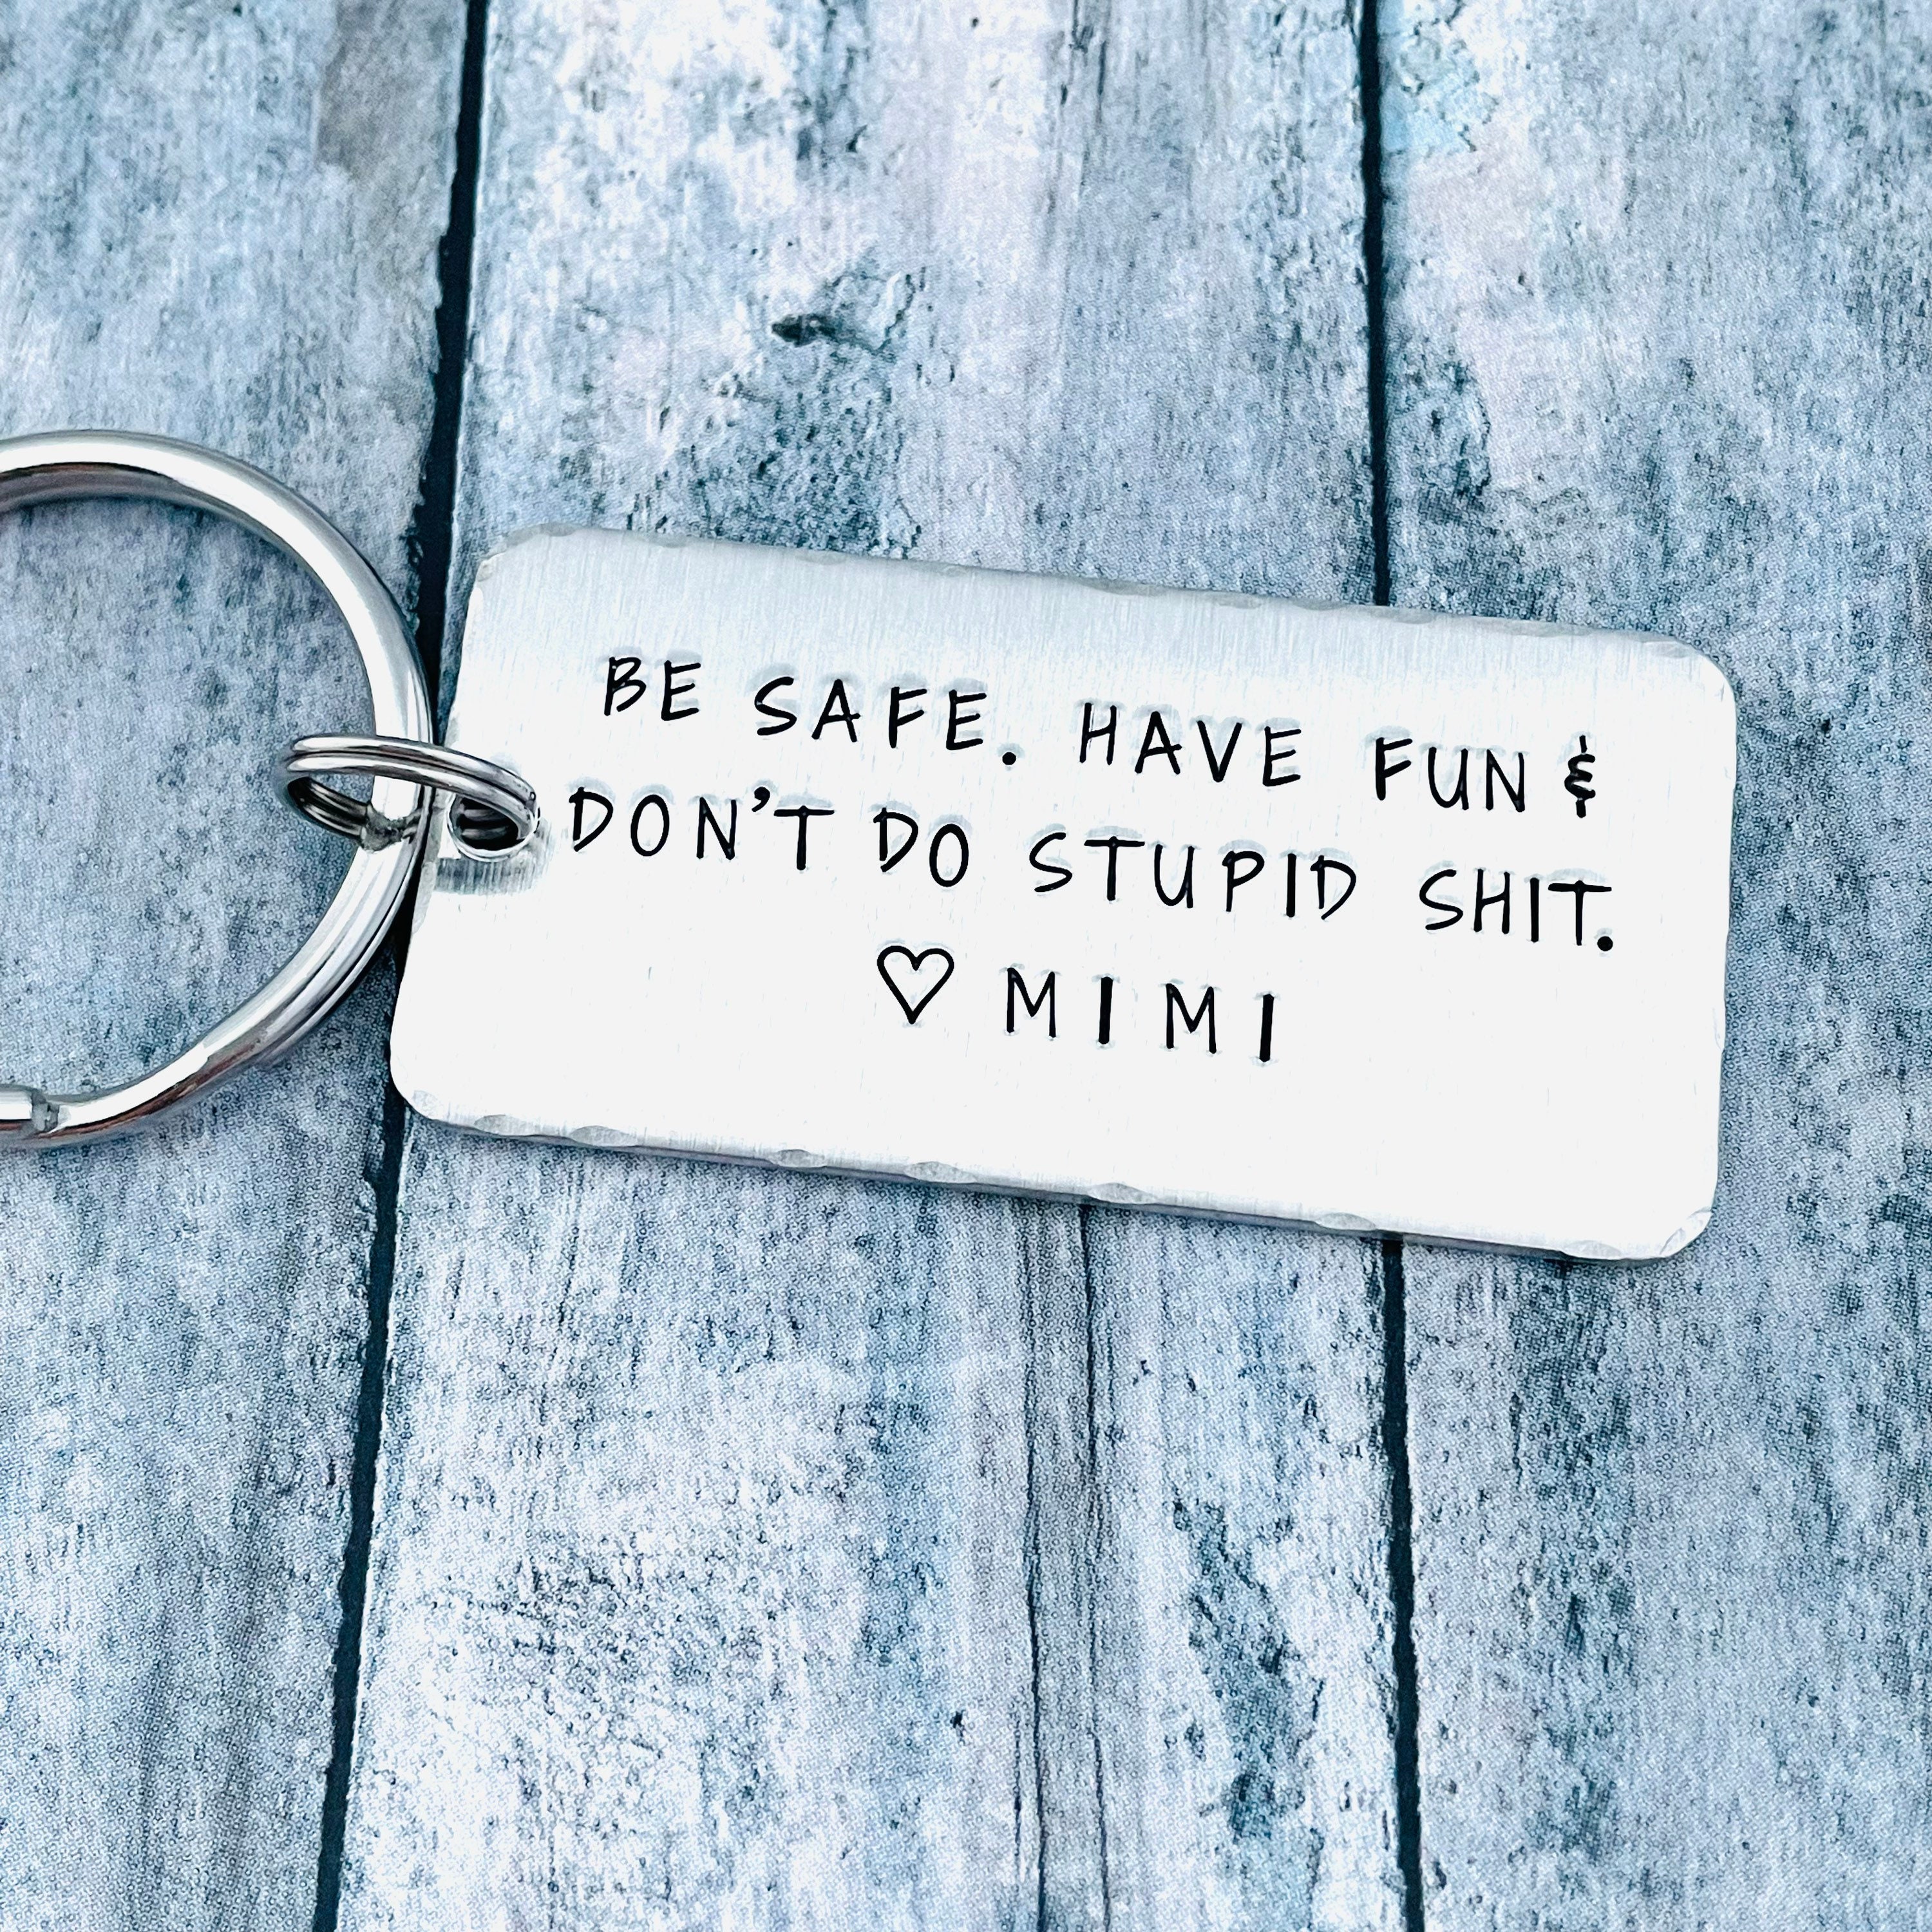 Be Safe. Have Fun & Don't Do Stupid Sht. We Love You Love Mom Dad,  Personalized Keychain, New Driver, Sweet 16 Birthday, BE SAFE Keychain 